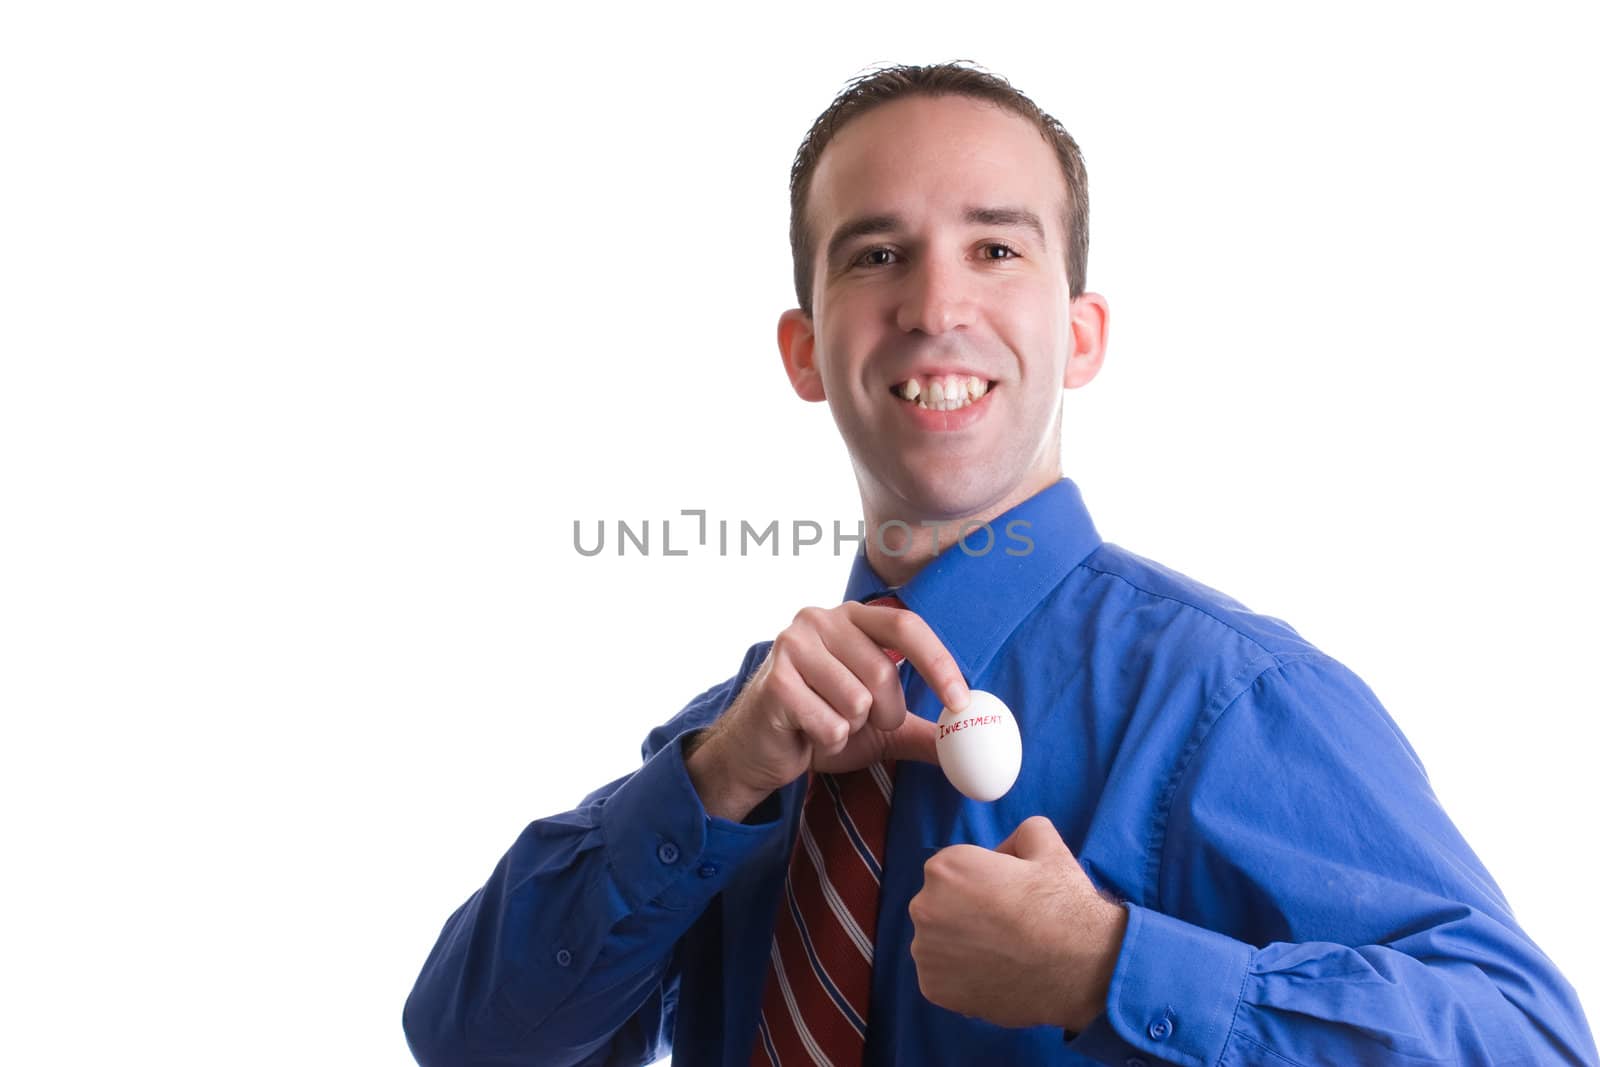 Concept image of a smiling businessman depositing his savings, using an egg as a metaphor, all isolated against a white background